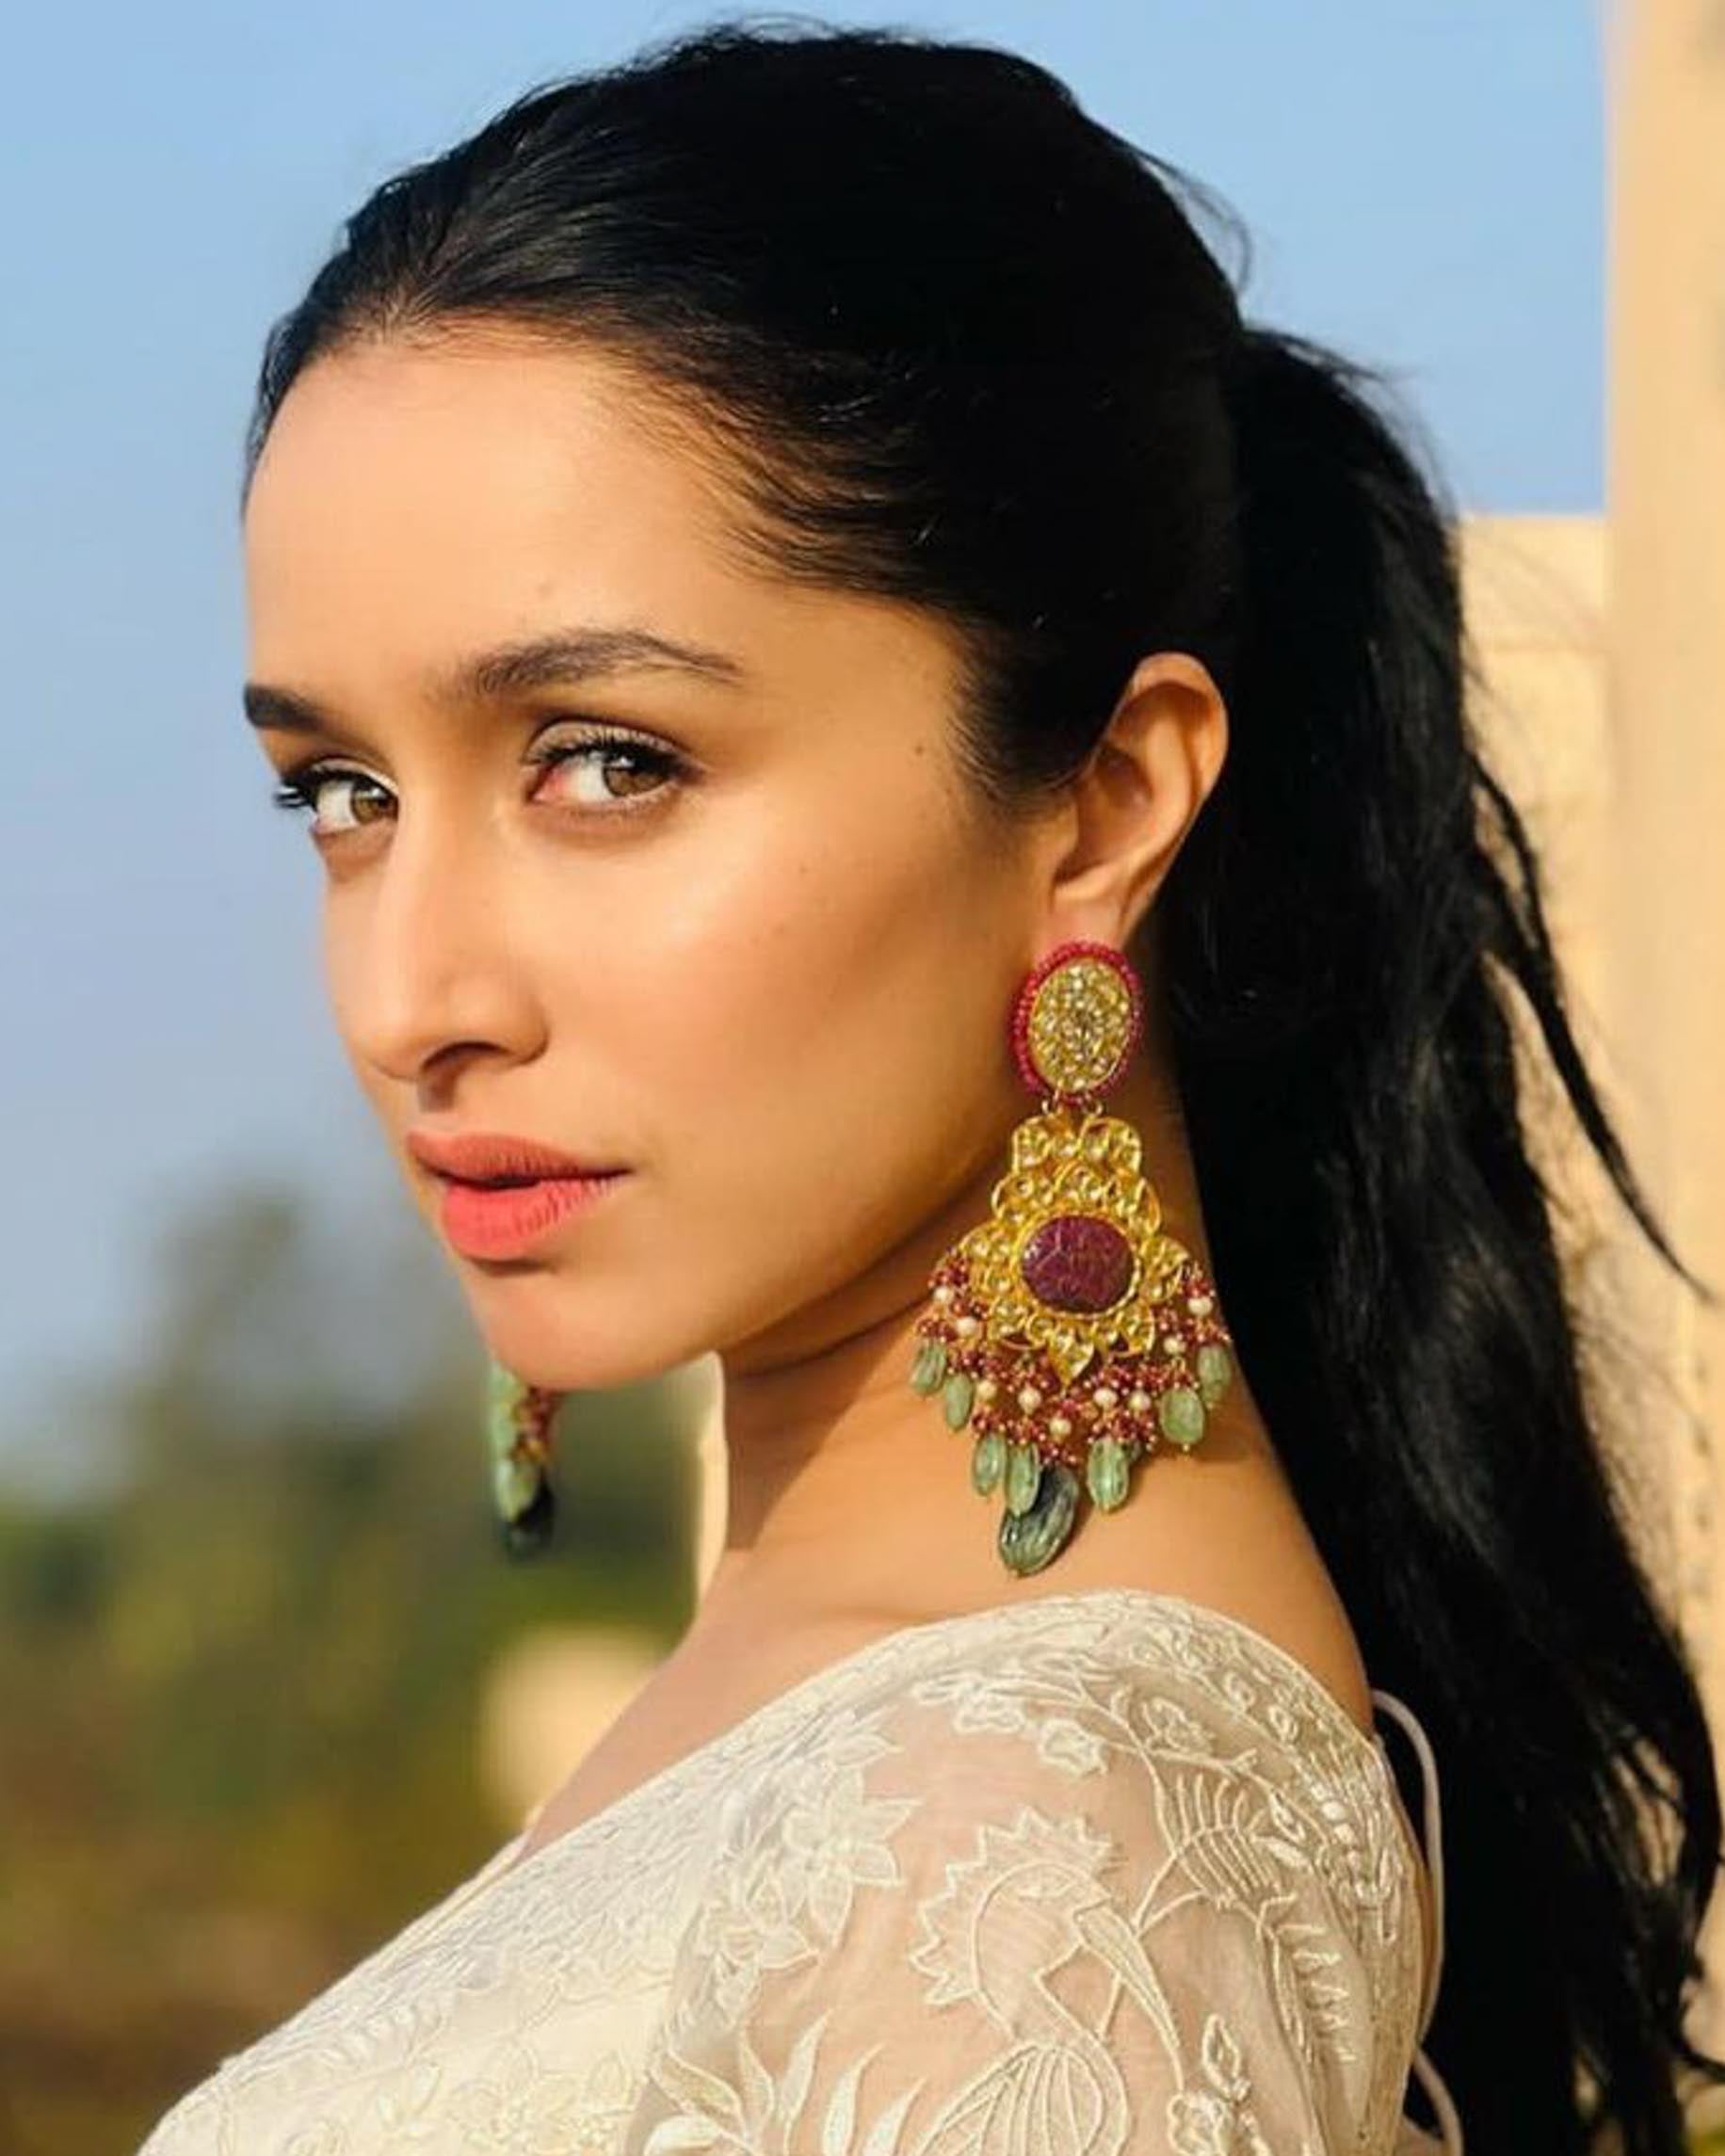 Cora Polki Long Earrings wore by Indian actress Shraddha Kapoor 